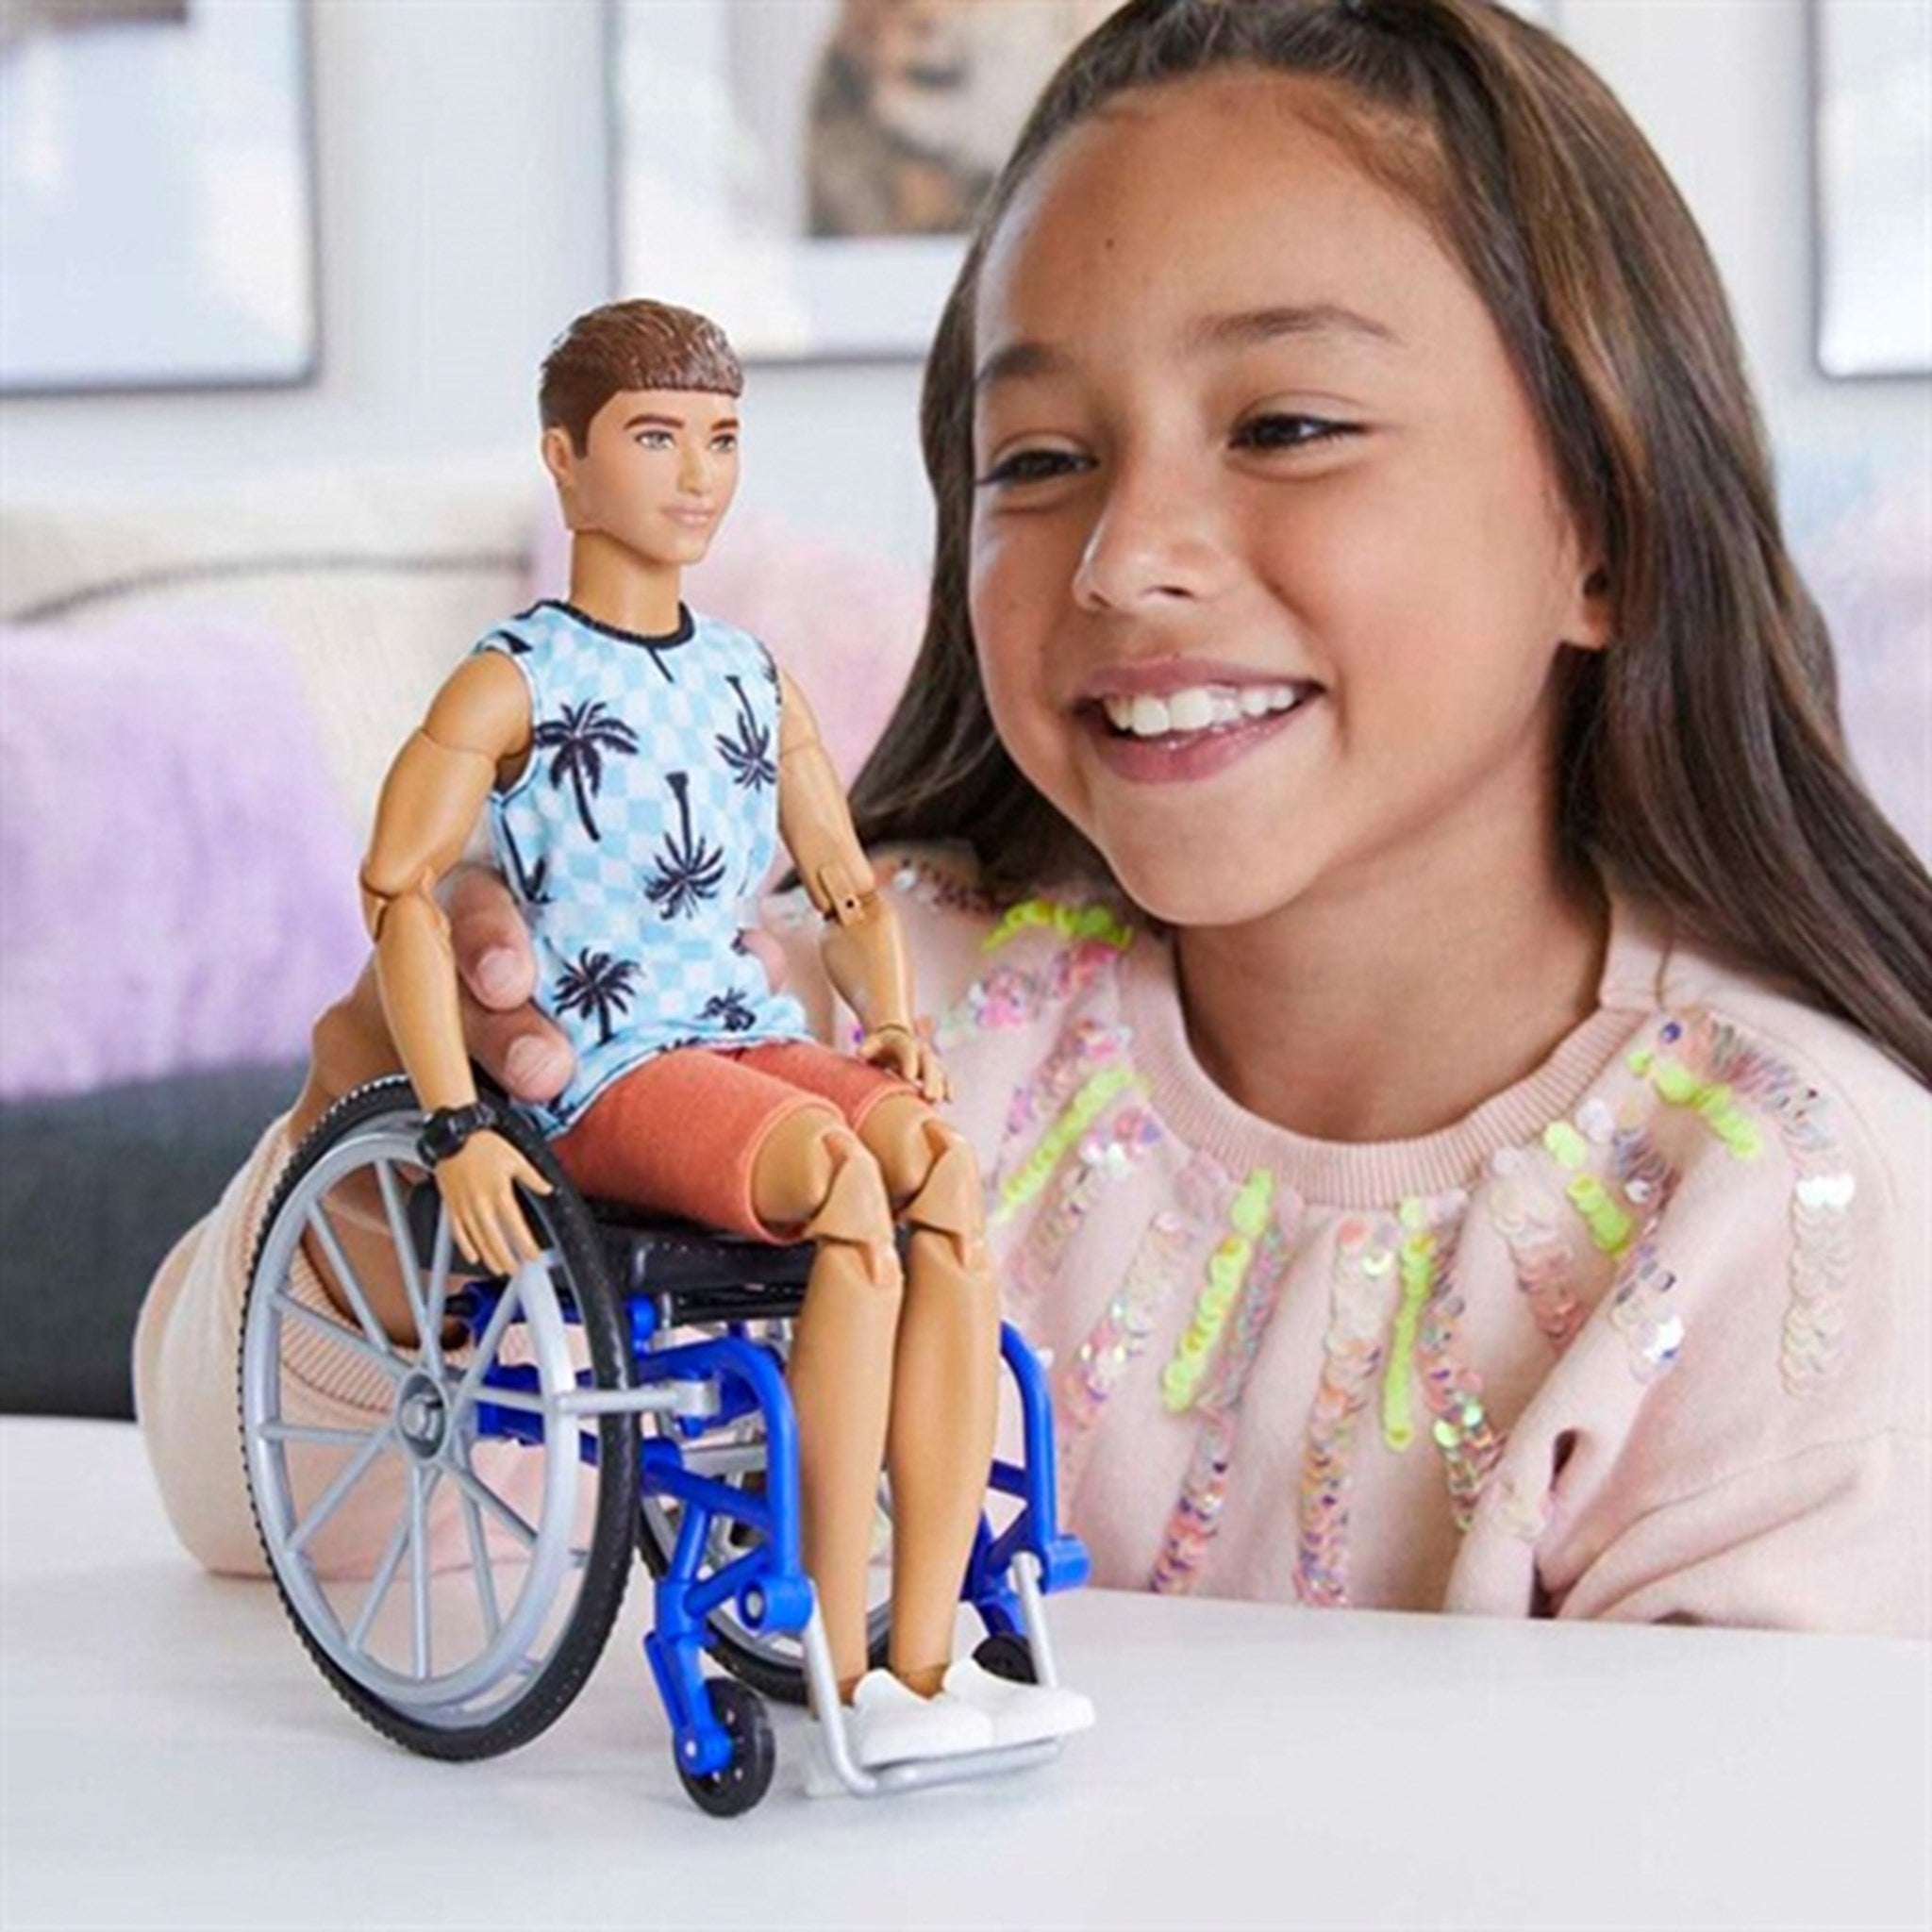 Barbie Doll with Wheelchair and Ramp, Kids Toys, Fashionistas